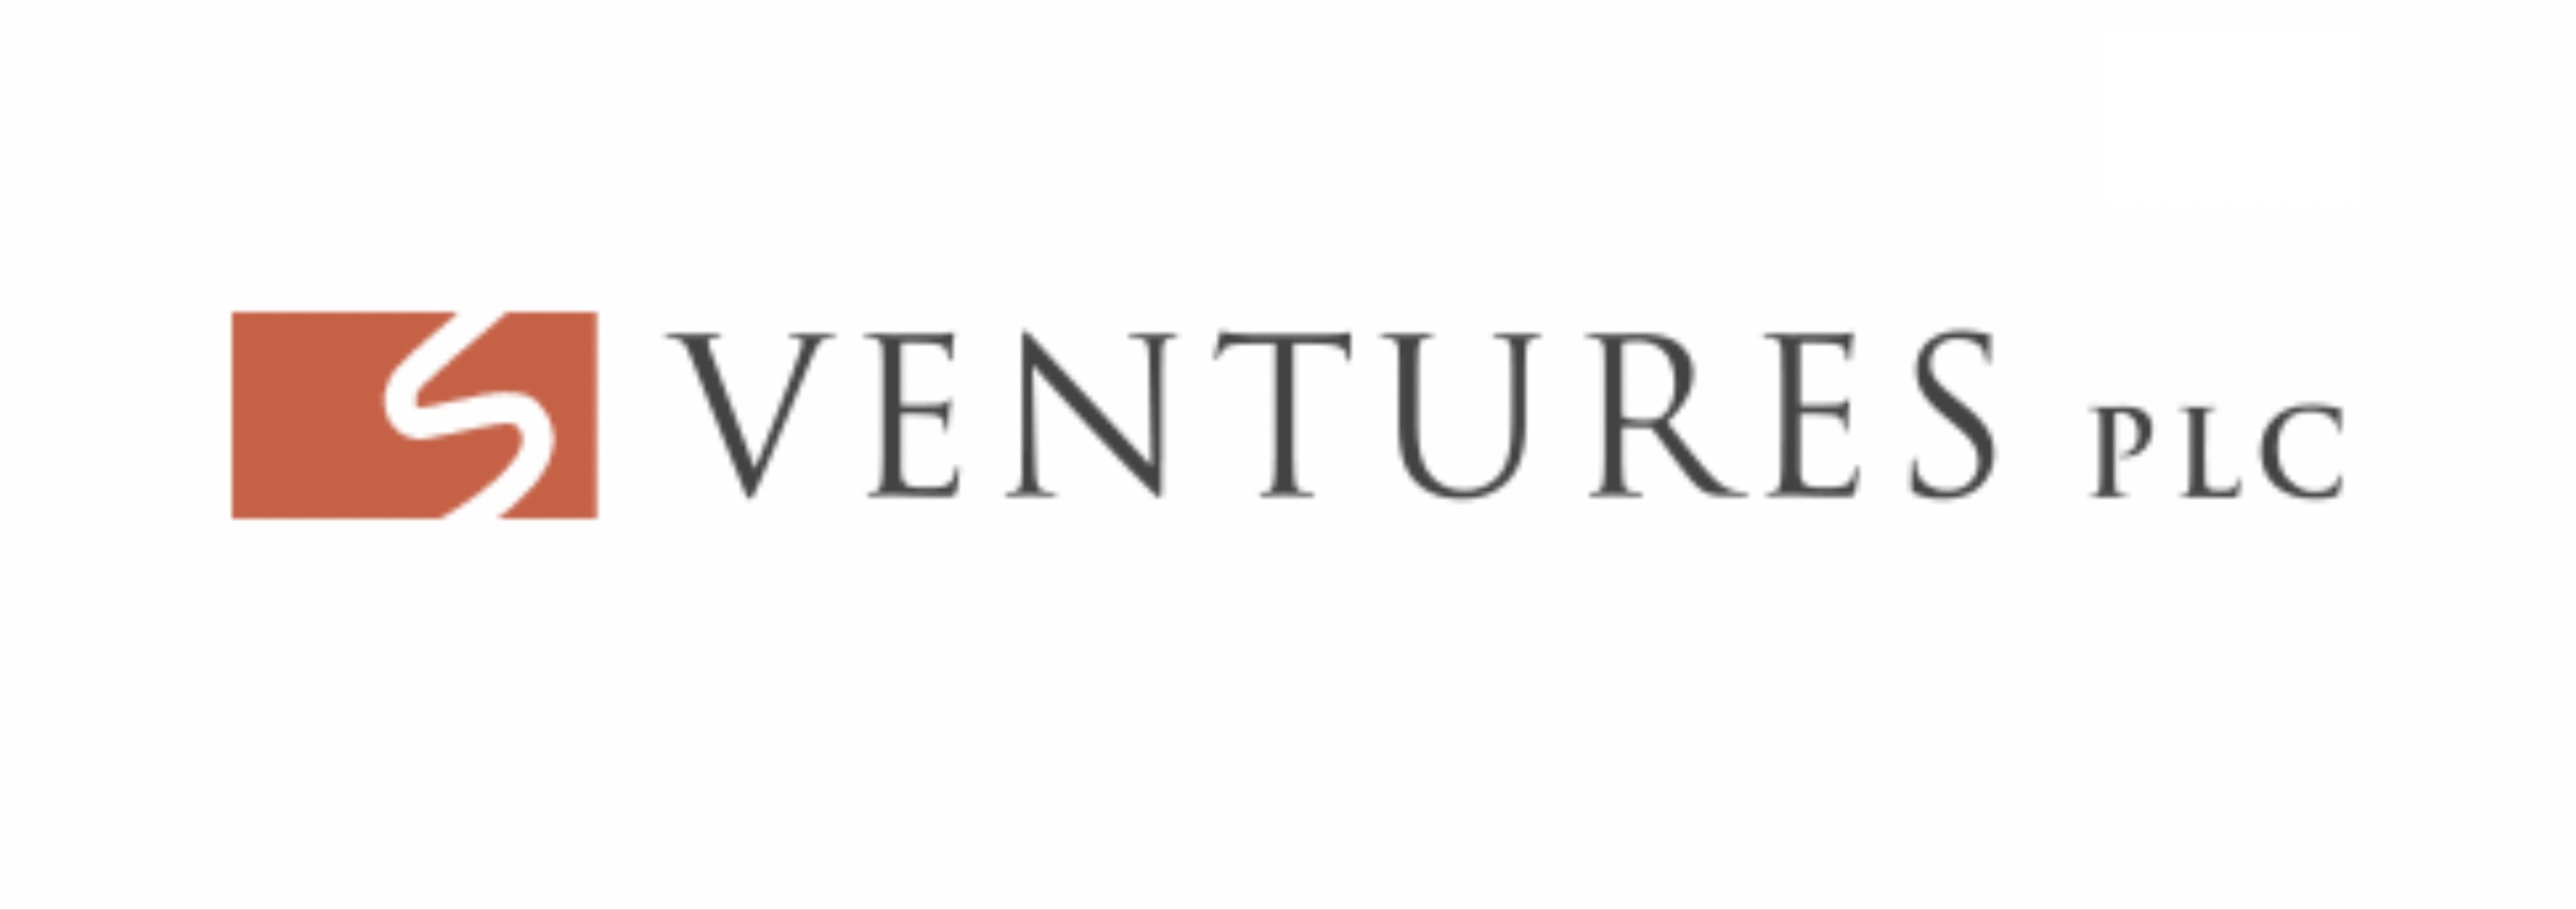 S-Ventures PLC, Friday, November 4, 2022, Press release picture